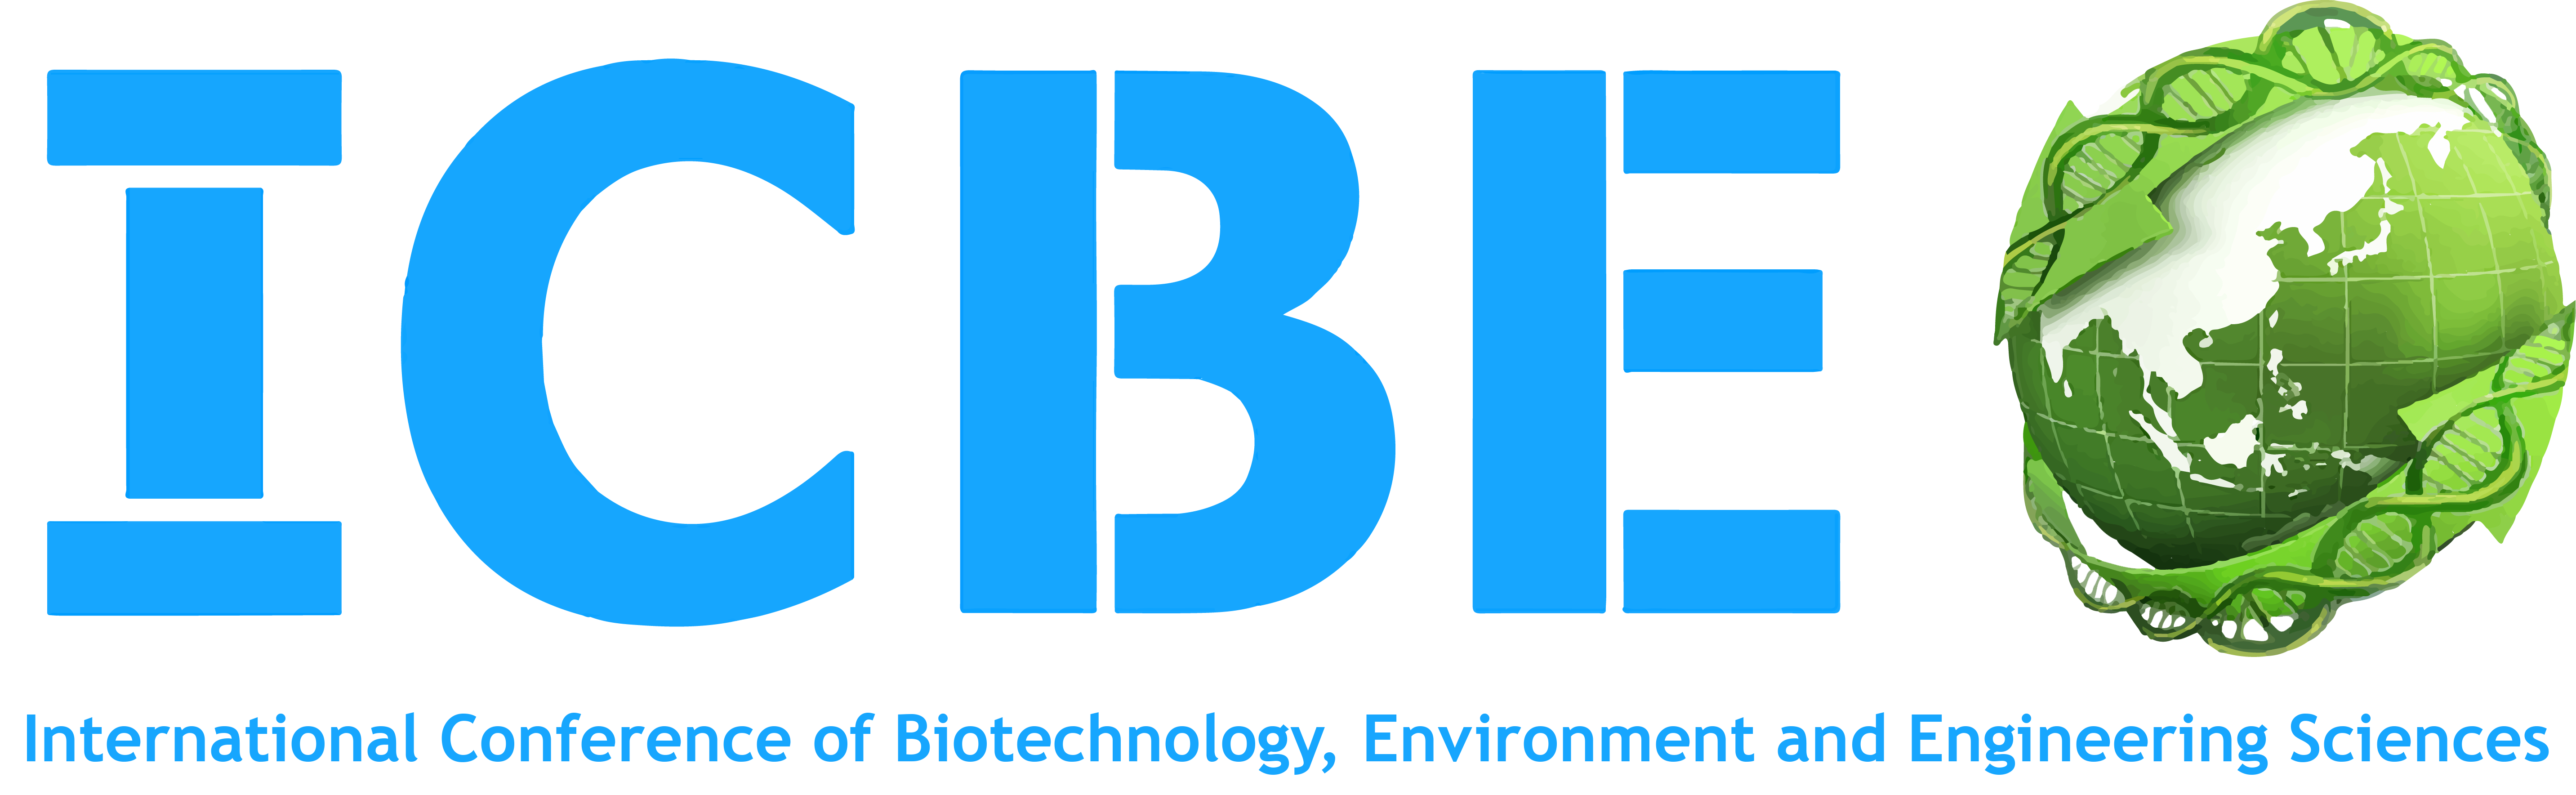 The 5th International Conference of Biotechnology, Environment and Engineering Sciences